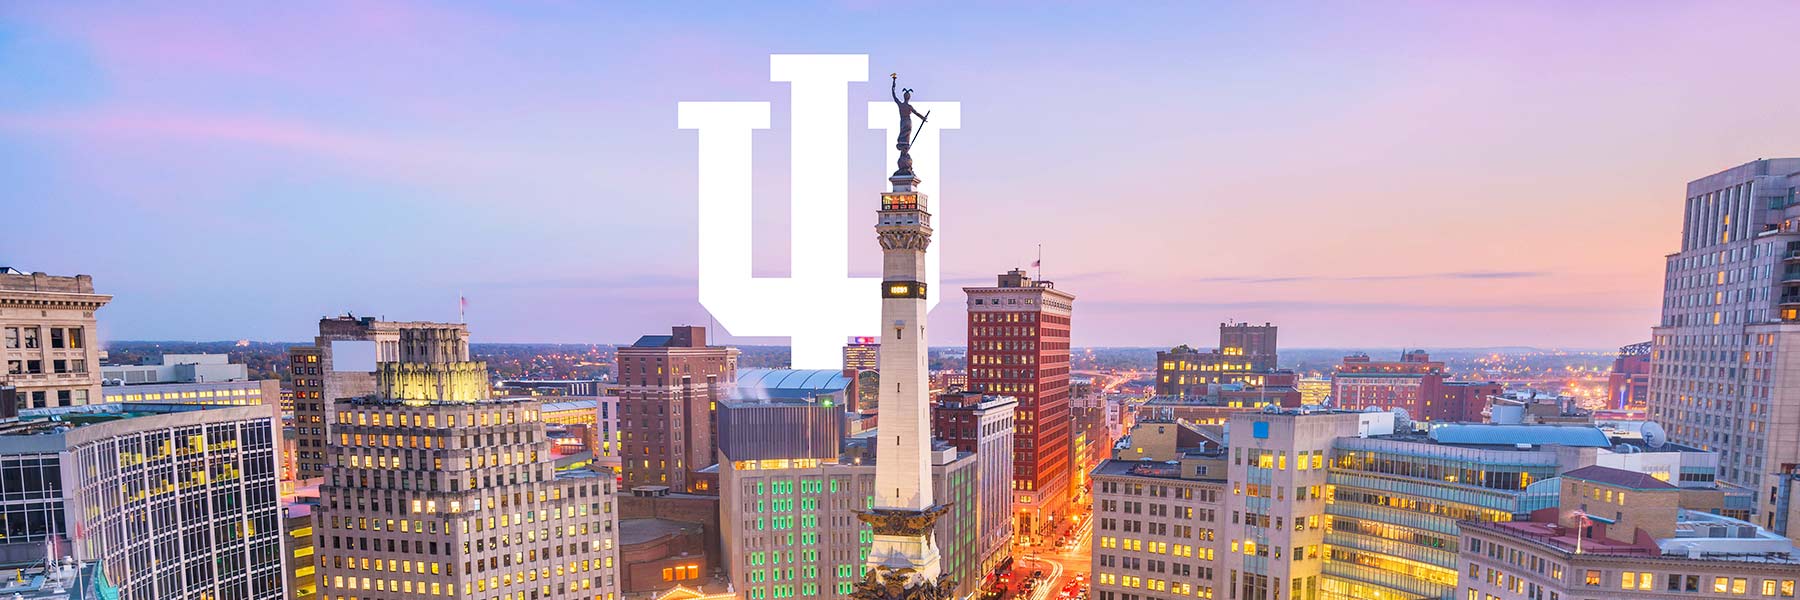 The Indianapolis skyline and Circle Center Monument are pictured during a colorful sunset, IU's trident logo is placed within the skyline.